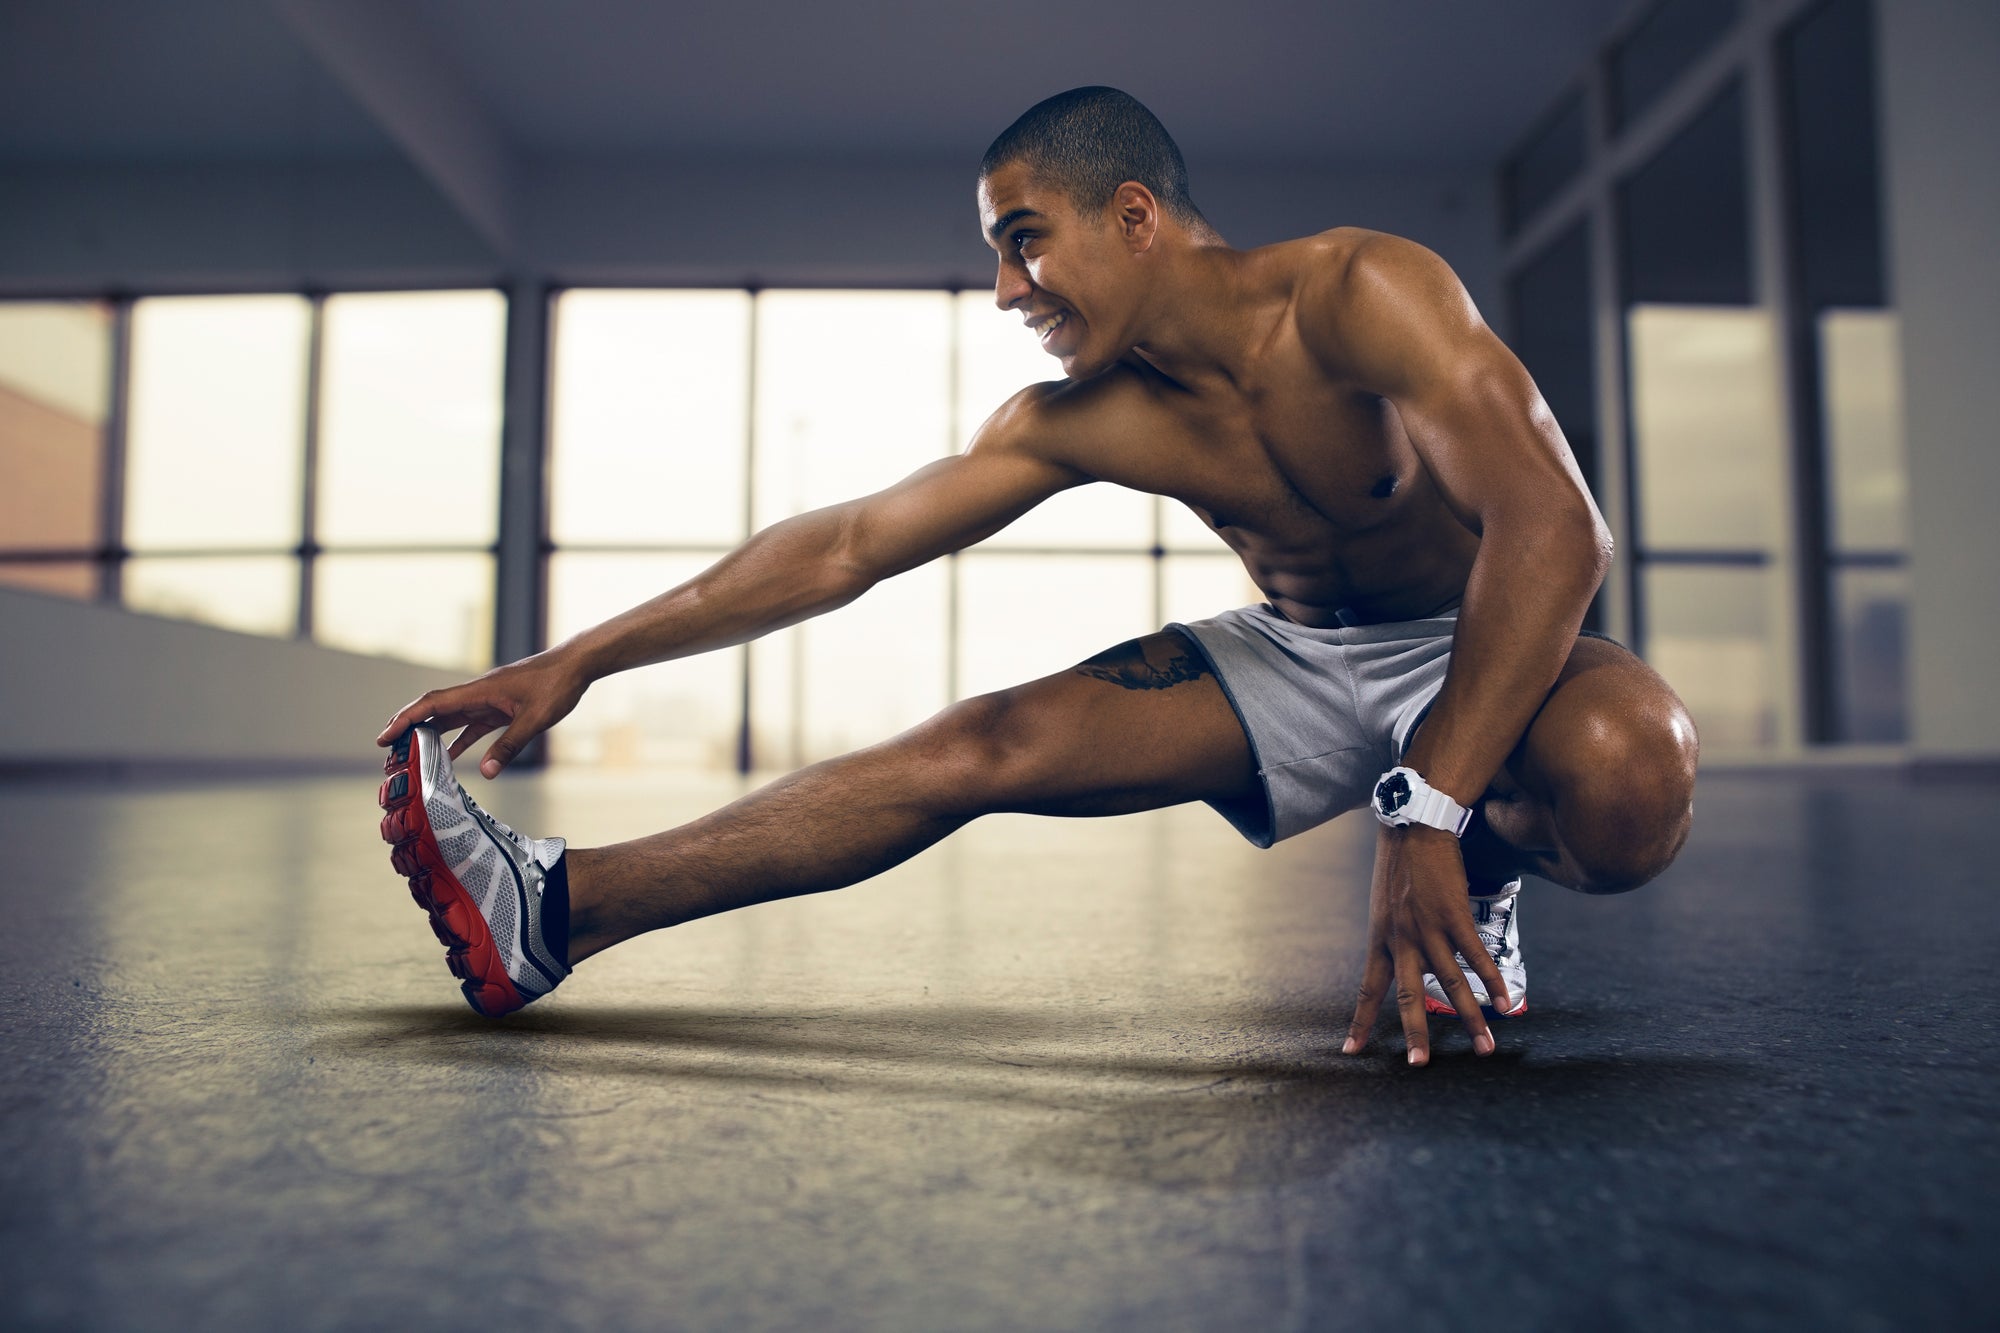 13 Best Workout Tips for Men to Maximize Results